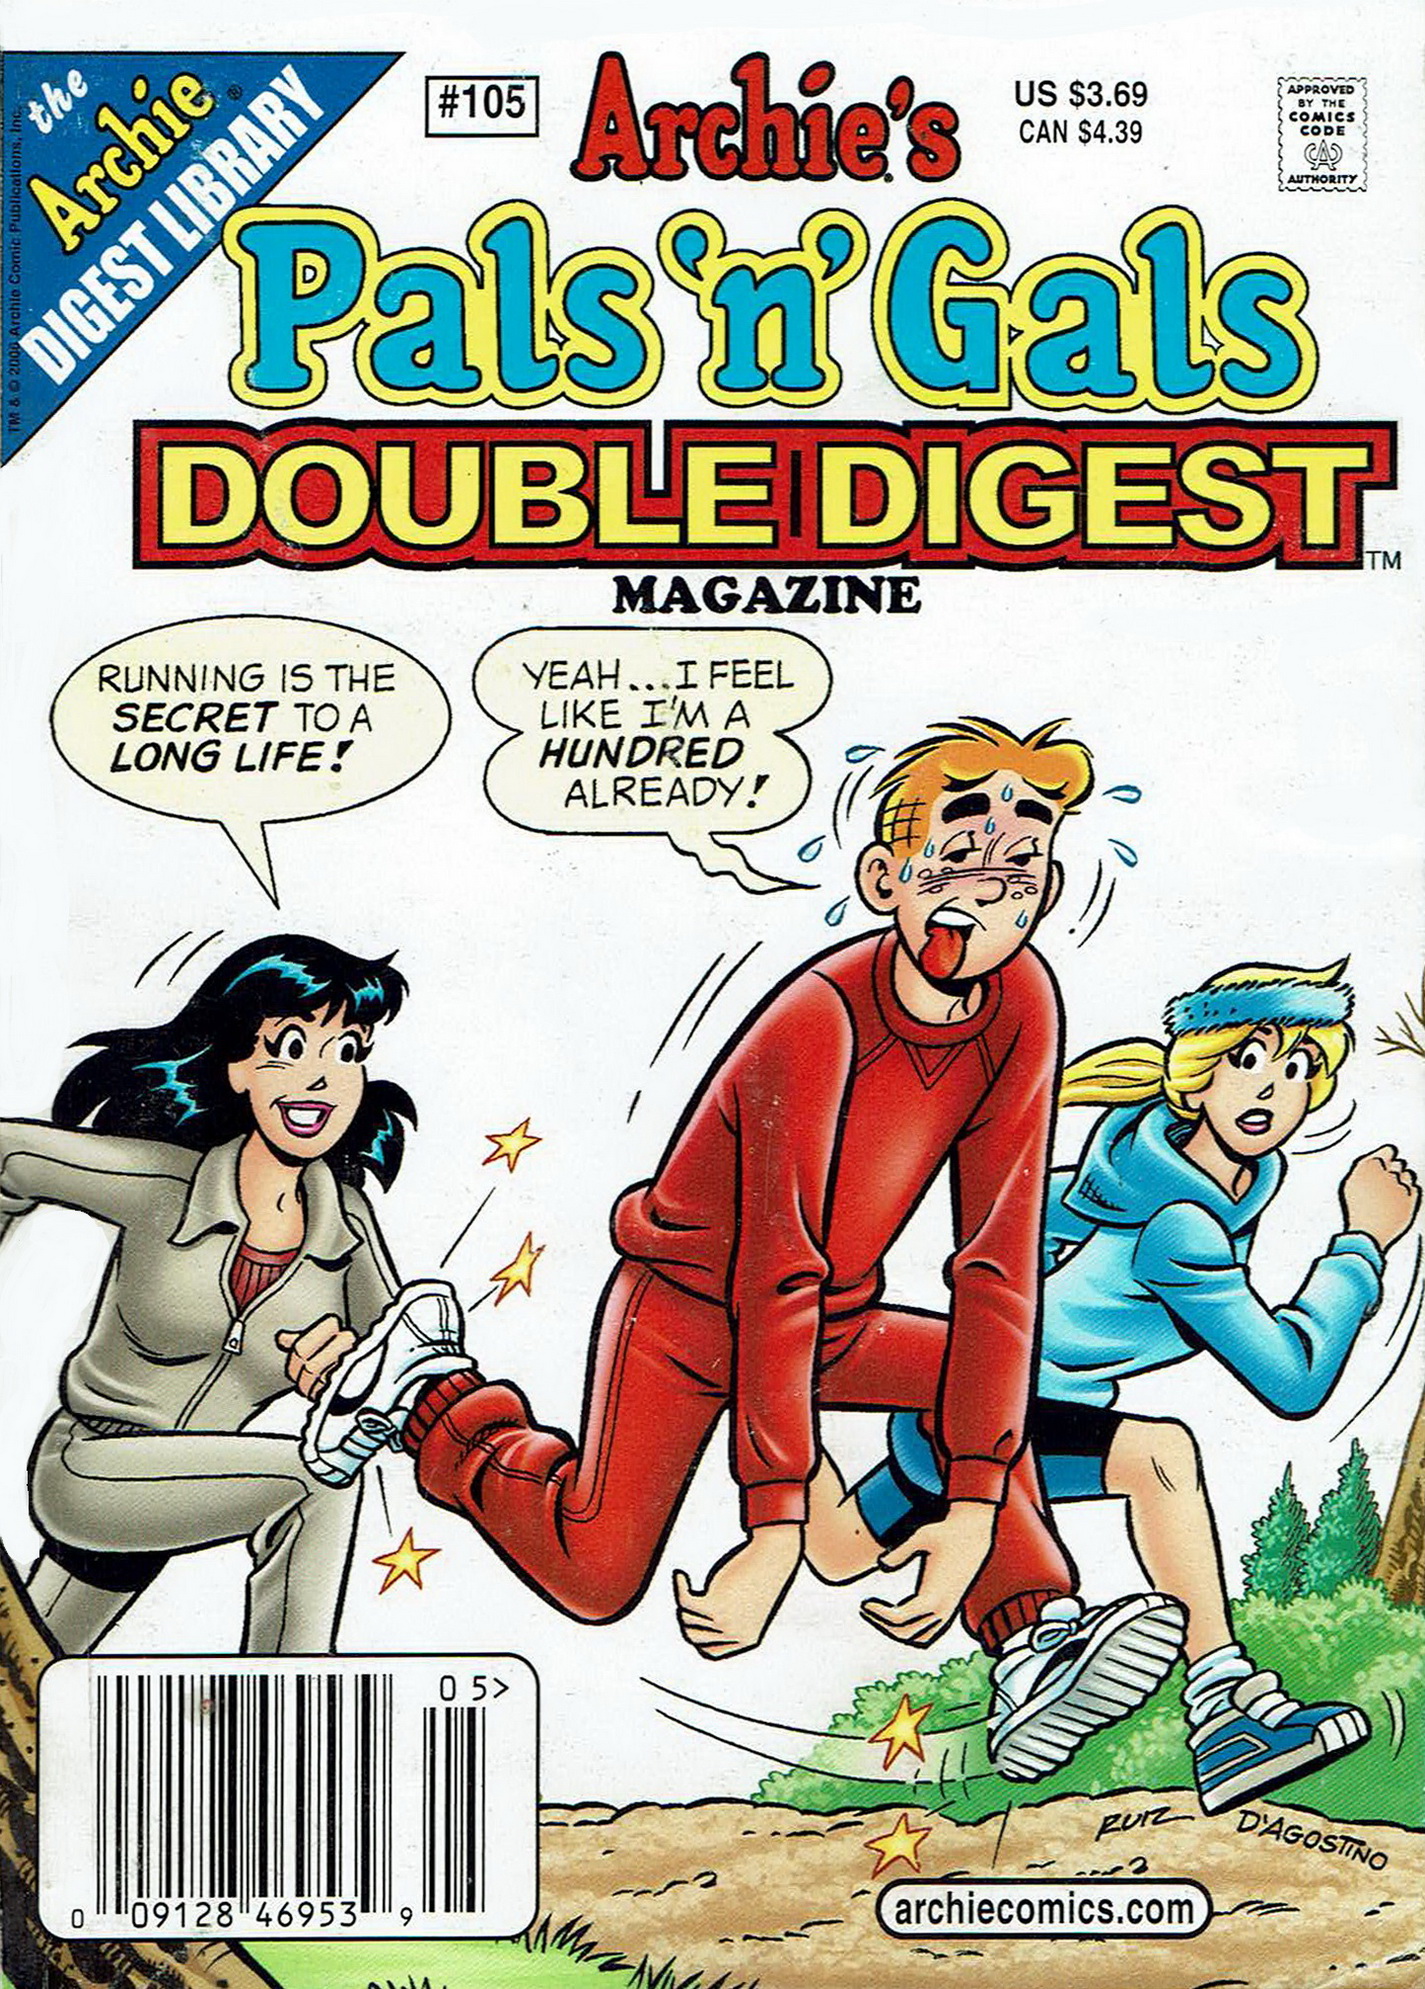 Archie's Pals 'n' Gals Double Digest Magazine issue 105 - Page 1